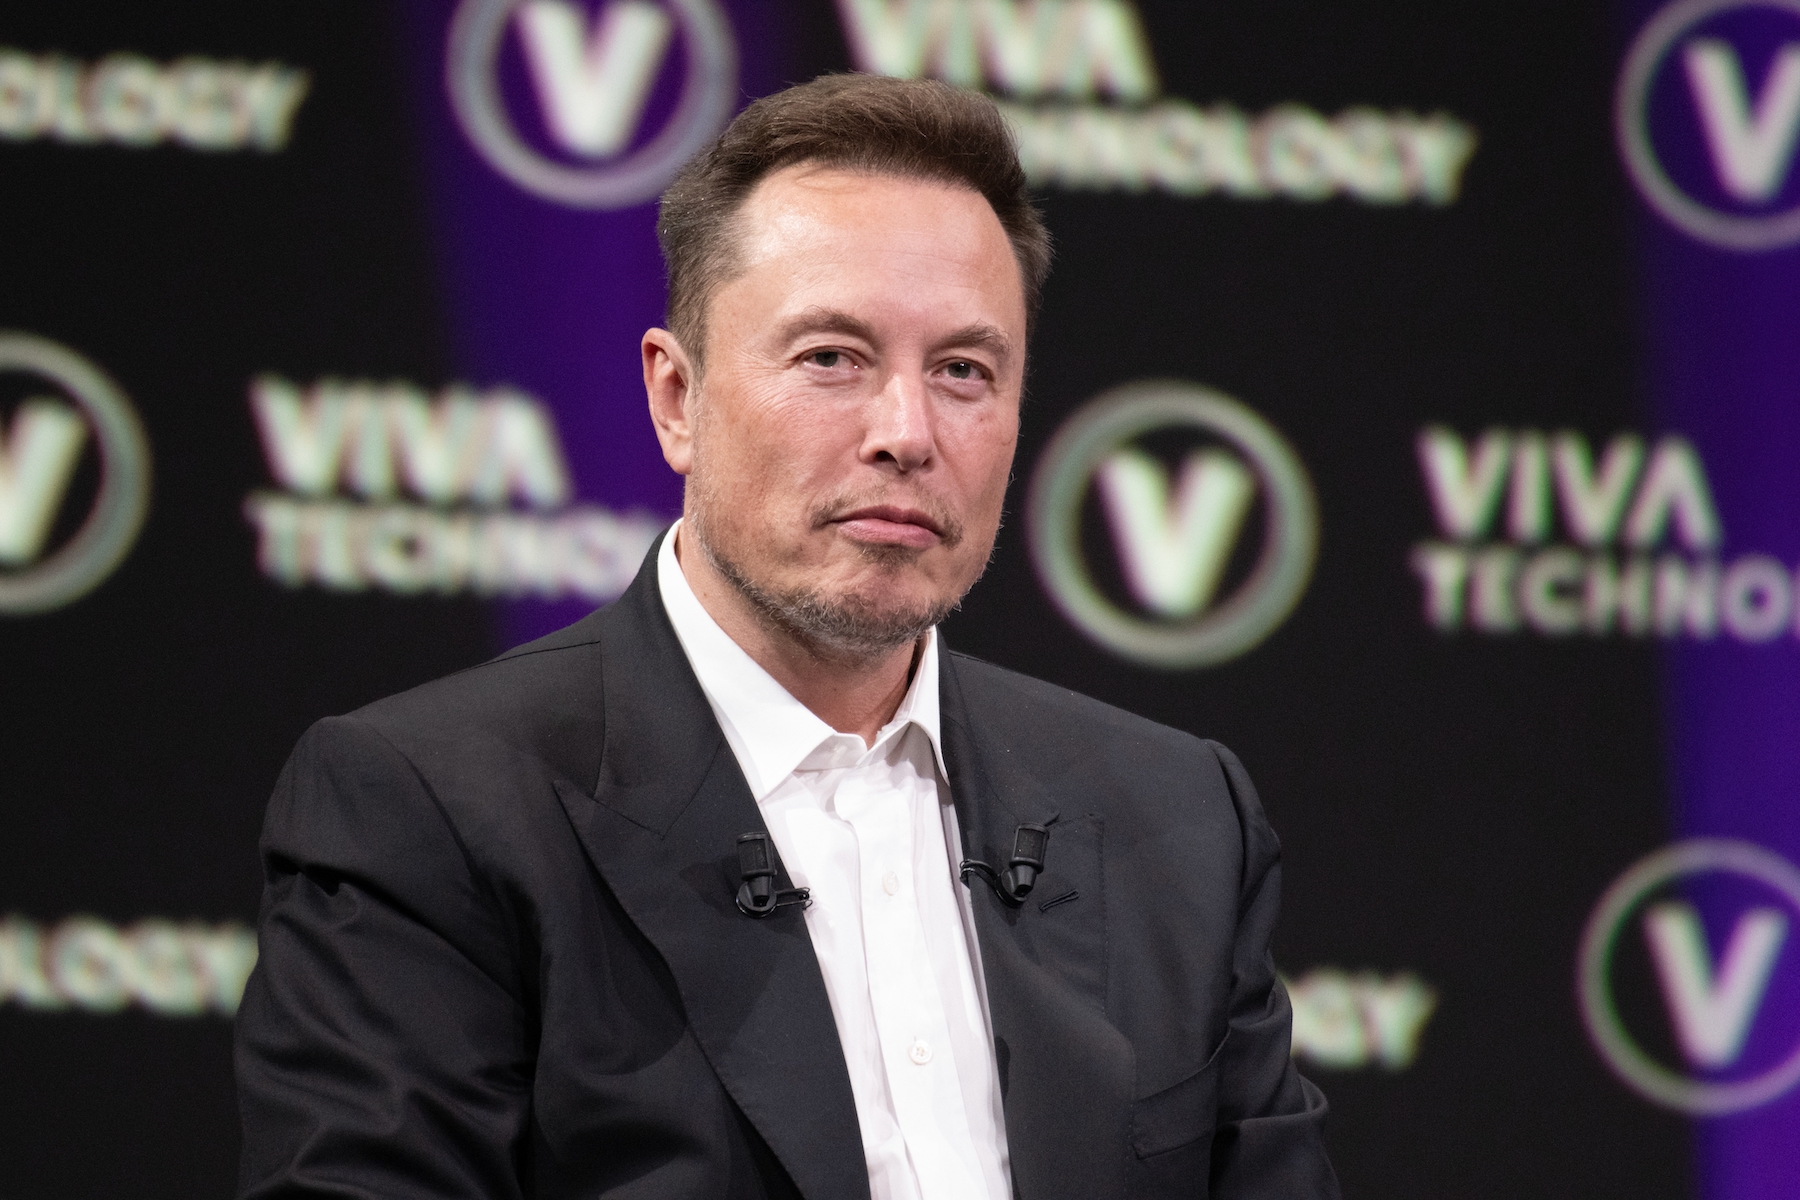 Elon Musk, looking into the camera sitting at a press conference. Bust shot.